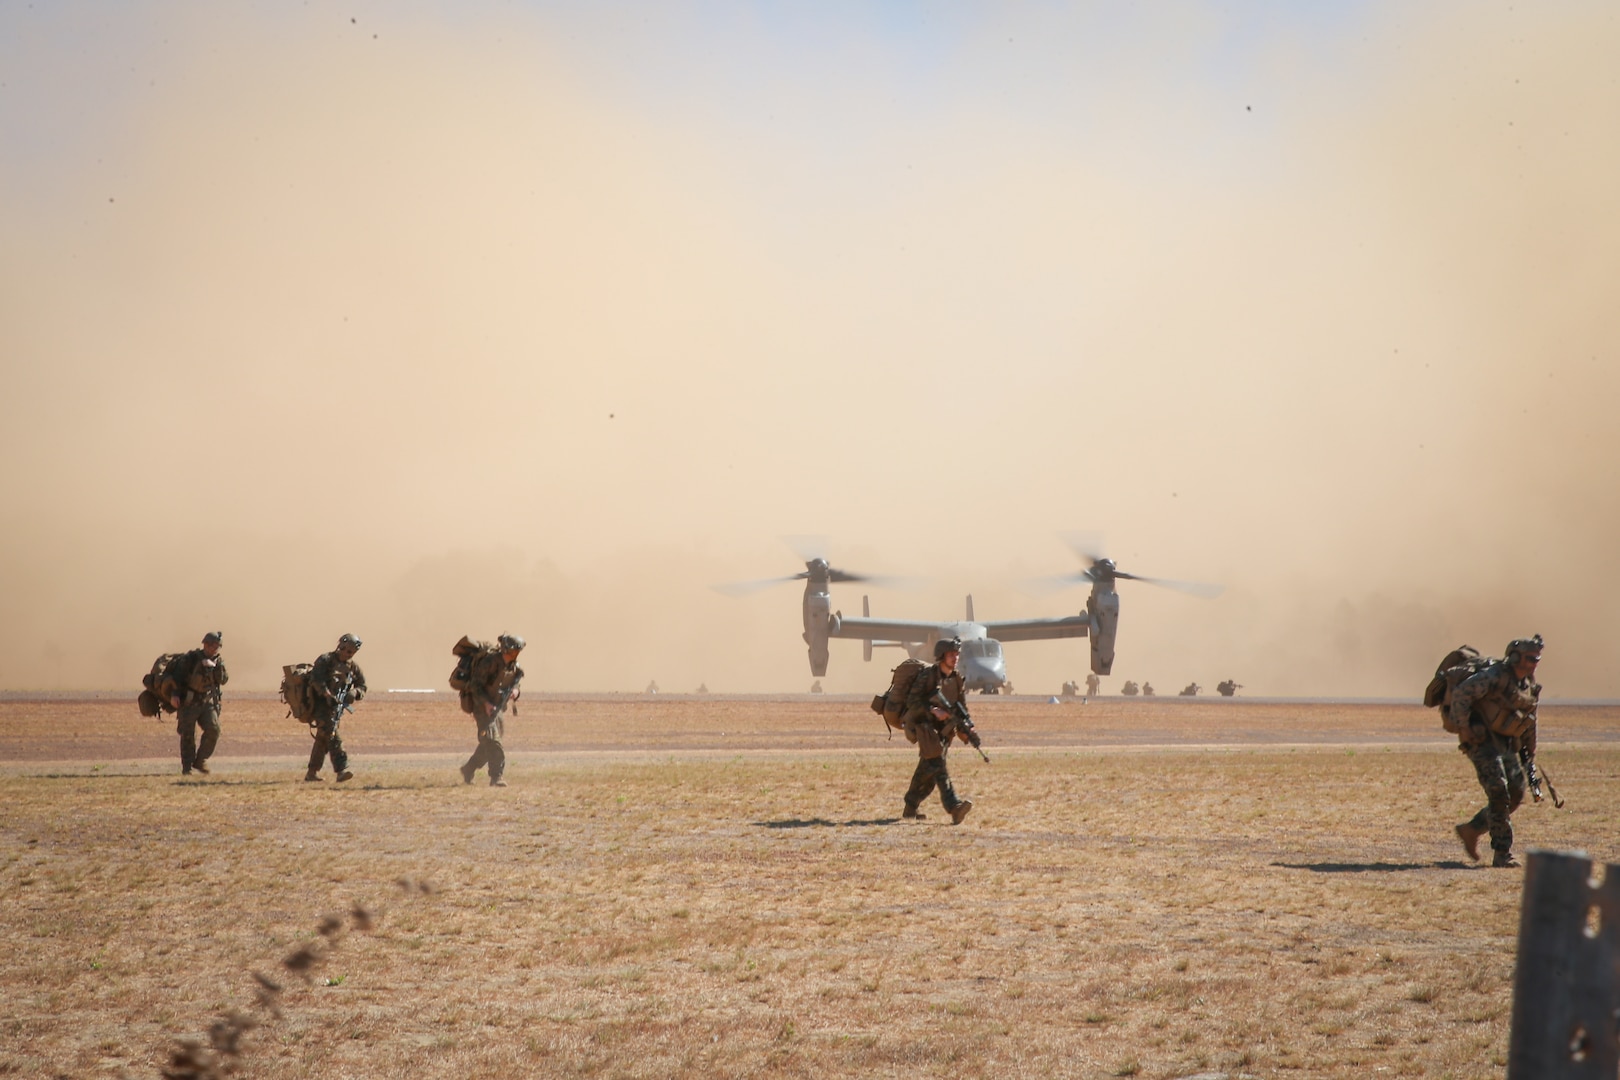 U.S. Marines with India Co., 3d Battalion, 7th Marine Regiment, Ground Combat Element, Marine Rotational Force-Darwin (MRF-D) 22, arrive at South Goulburn Island, Australia via U.S. Marine Corps MV-22 Ospreys with Marine Medium Tiltrotor Squadron 268 reinforced, Aviation Combat Element, MRF-D 22, Aug. 31, 2022. The Expeditionary Advanced Base Operations exercise was a force-on-force training that exercised the MRF-D’s ability to forward deploy and establish expeditionary advanced bases. (U.S. Marine Corps photo by Cpl. Emeline Molla)